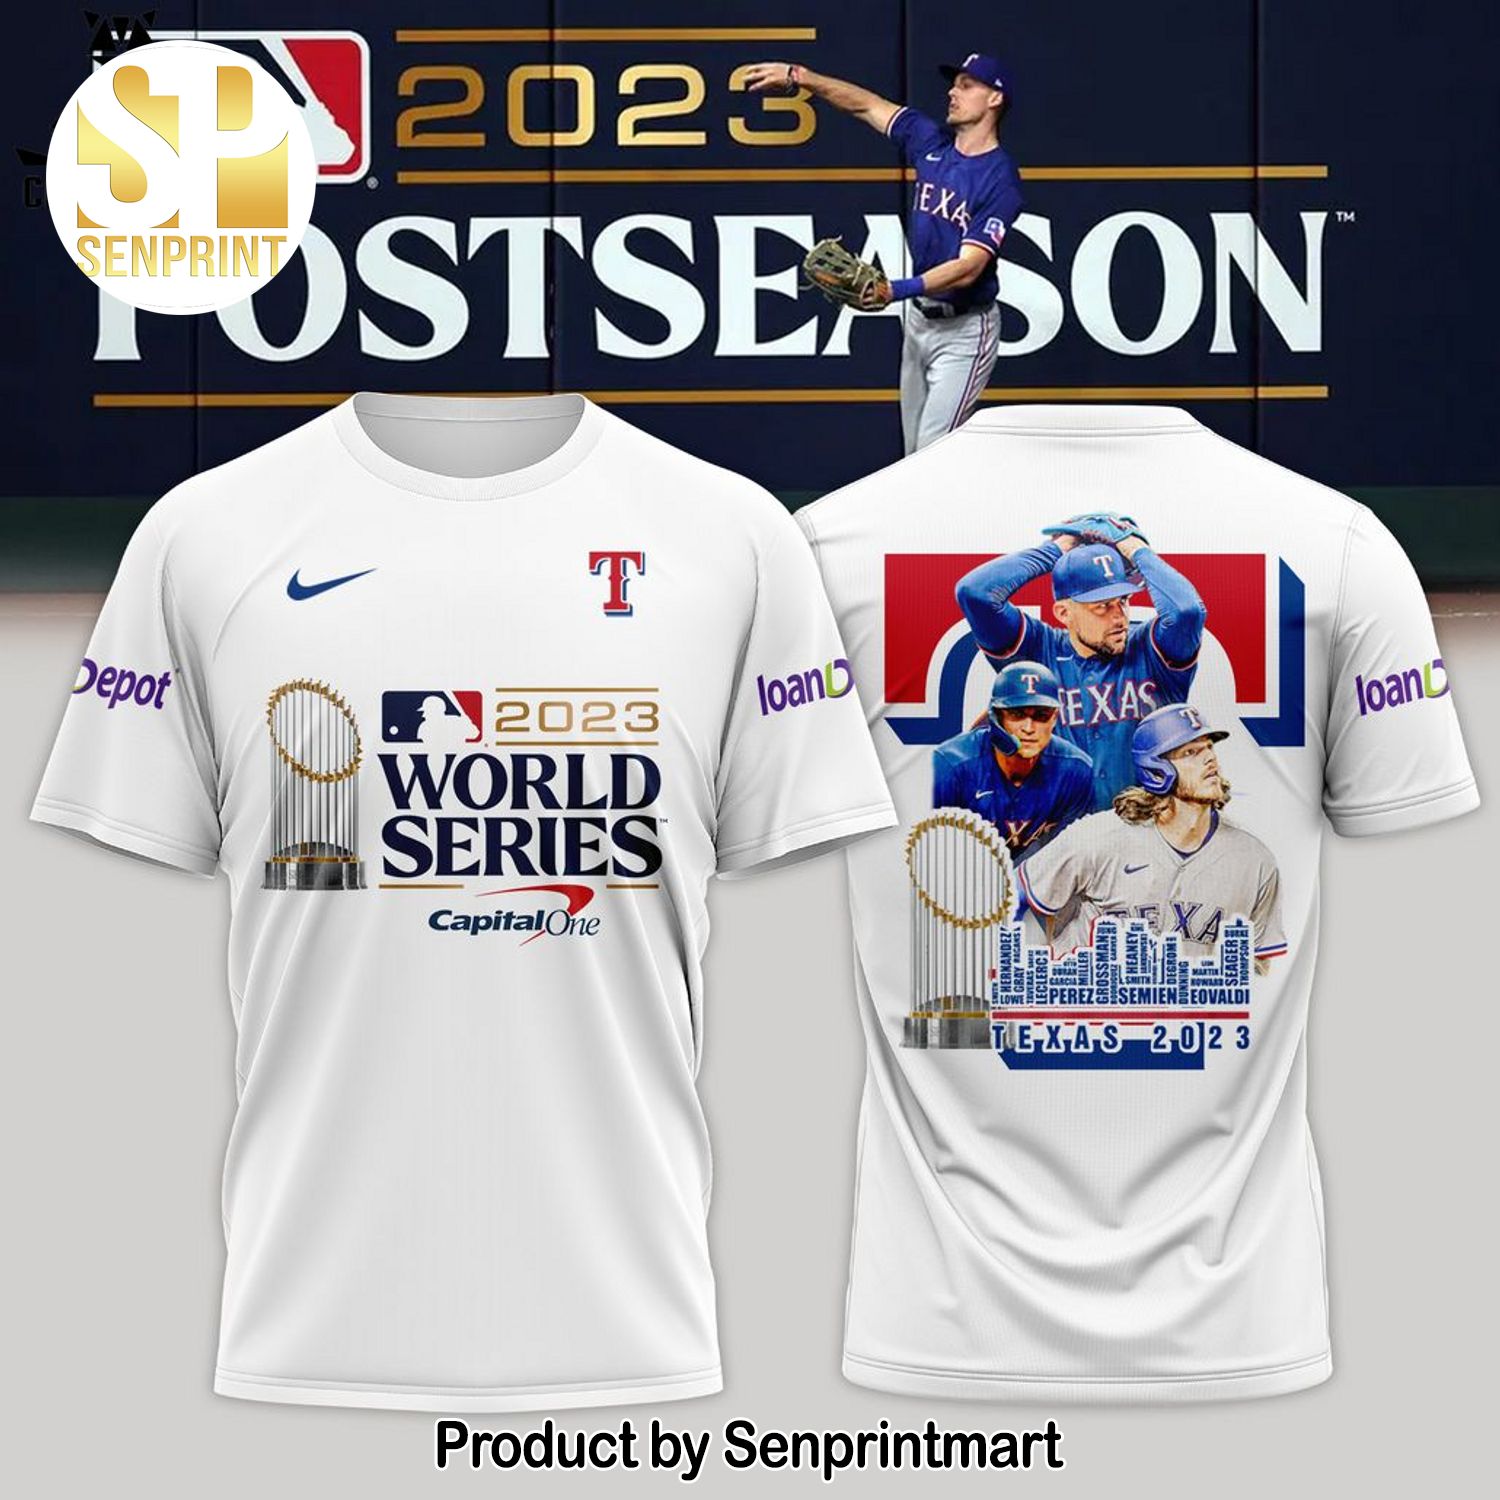 2023 World Series Capital One White 3D All Over Printed Shirt